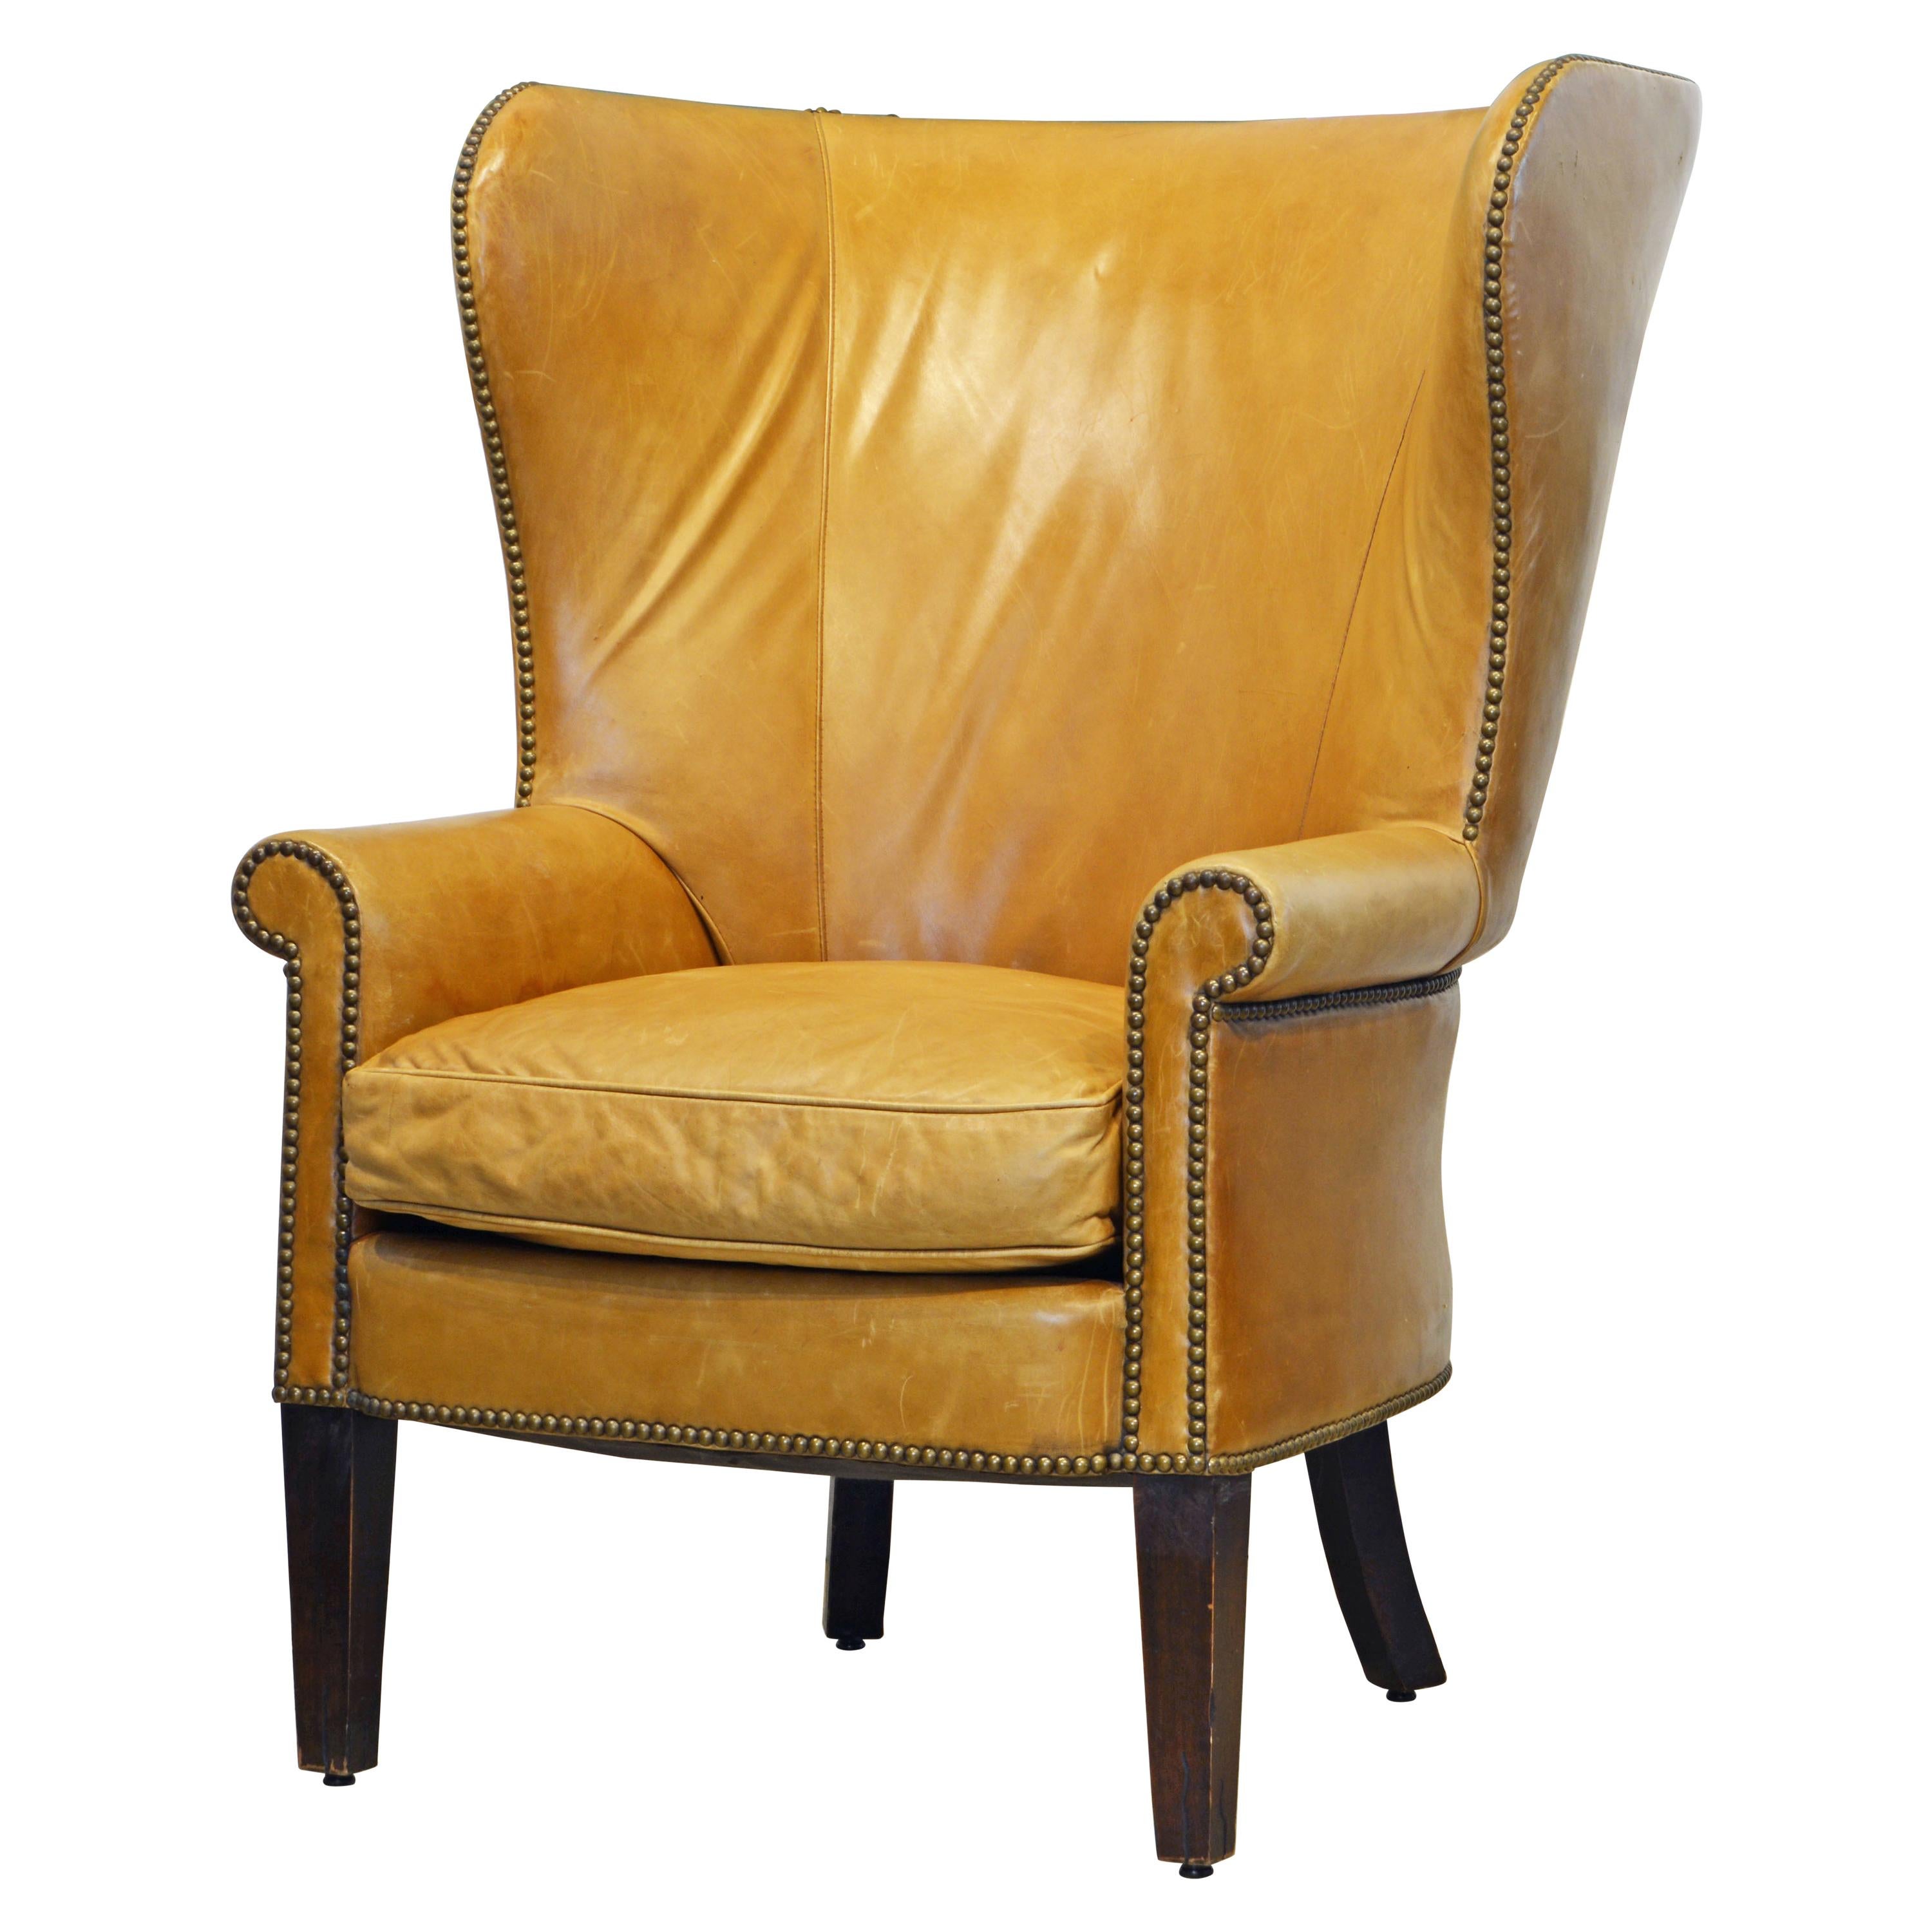 American Vintage Leather Covered and Nail Head Trimmed Wing Back Chair, 20th C.